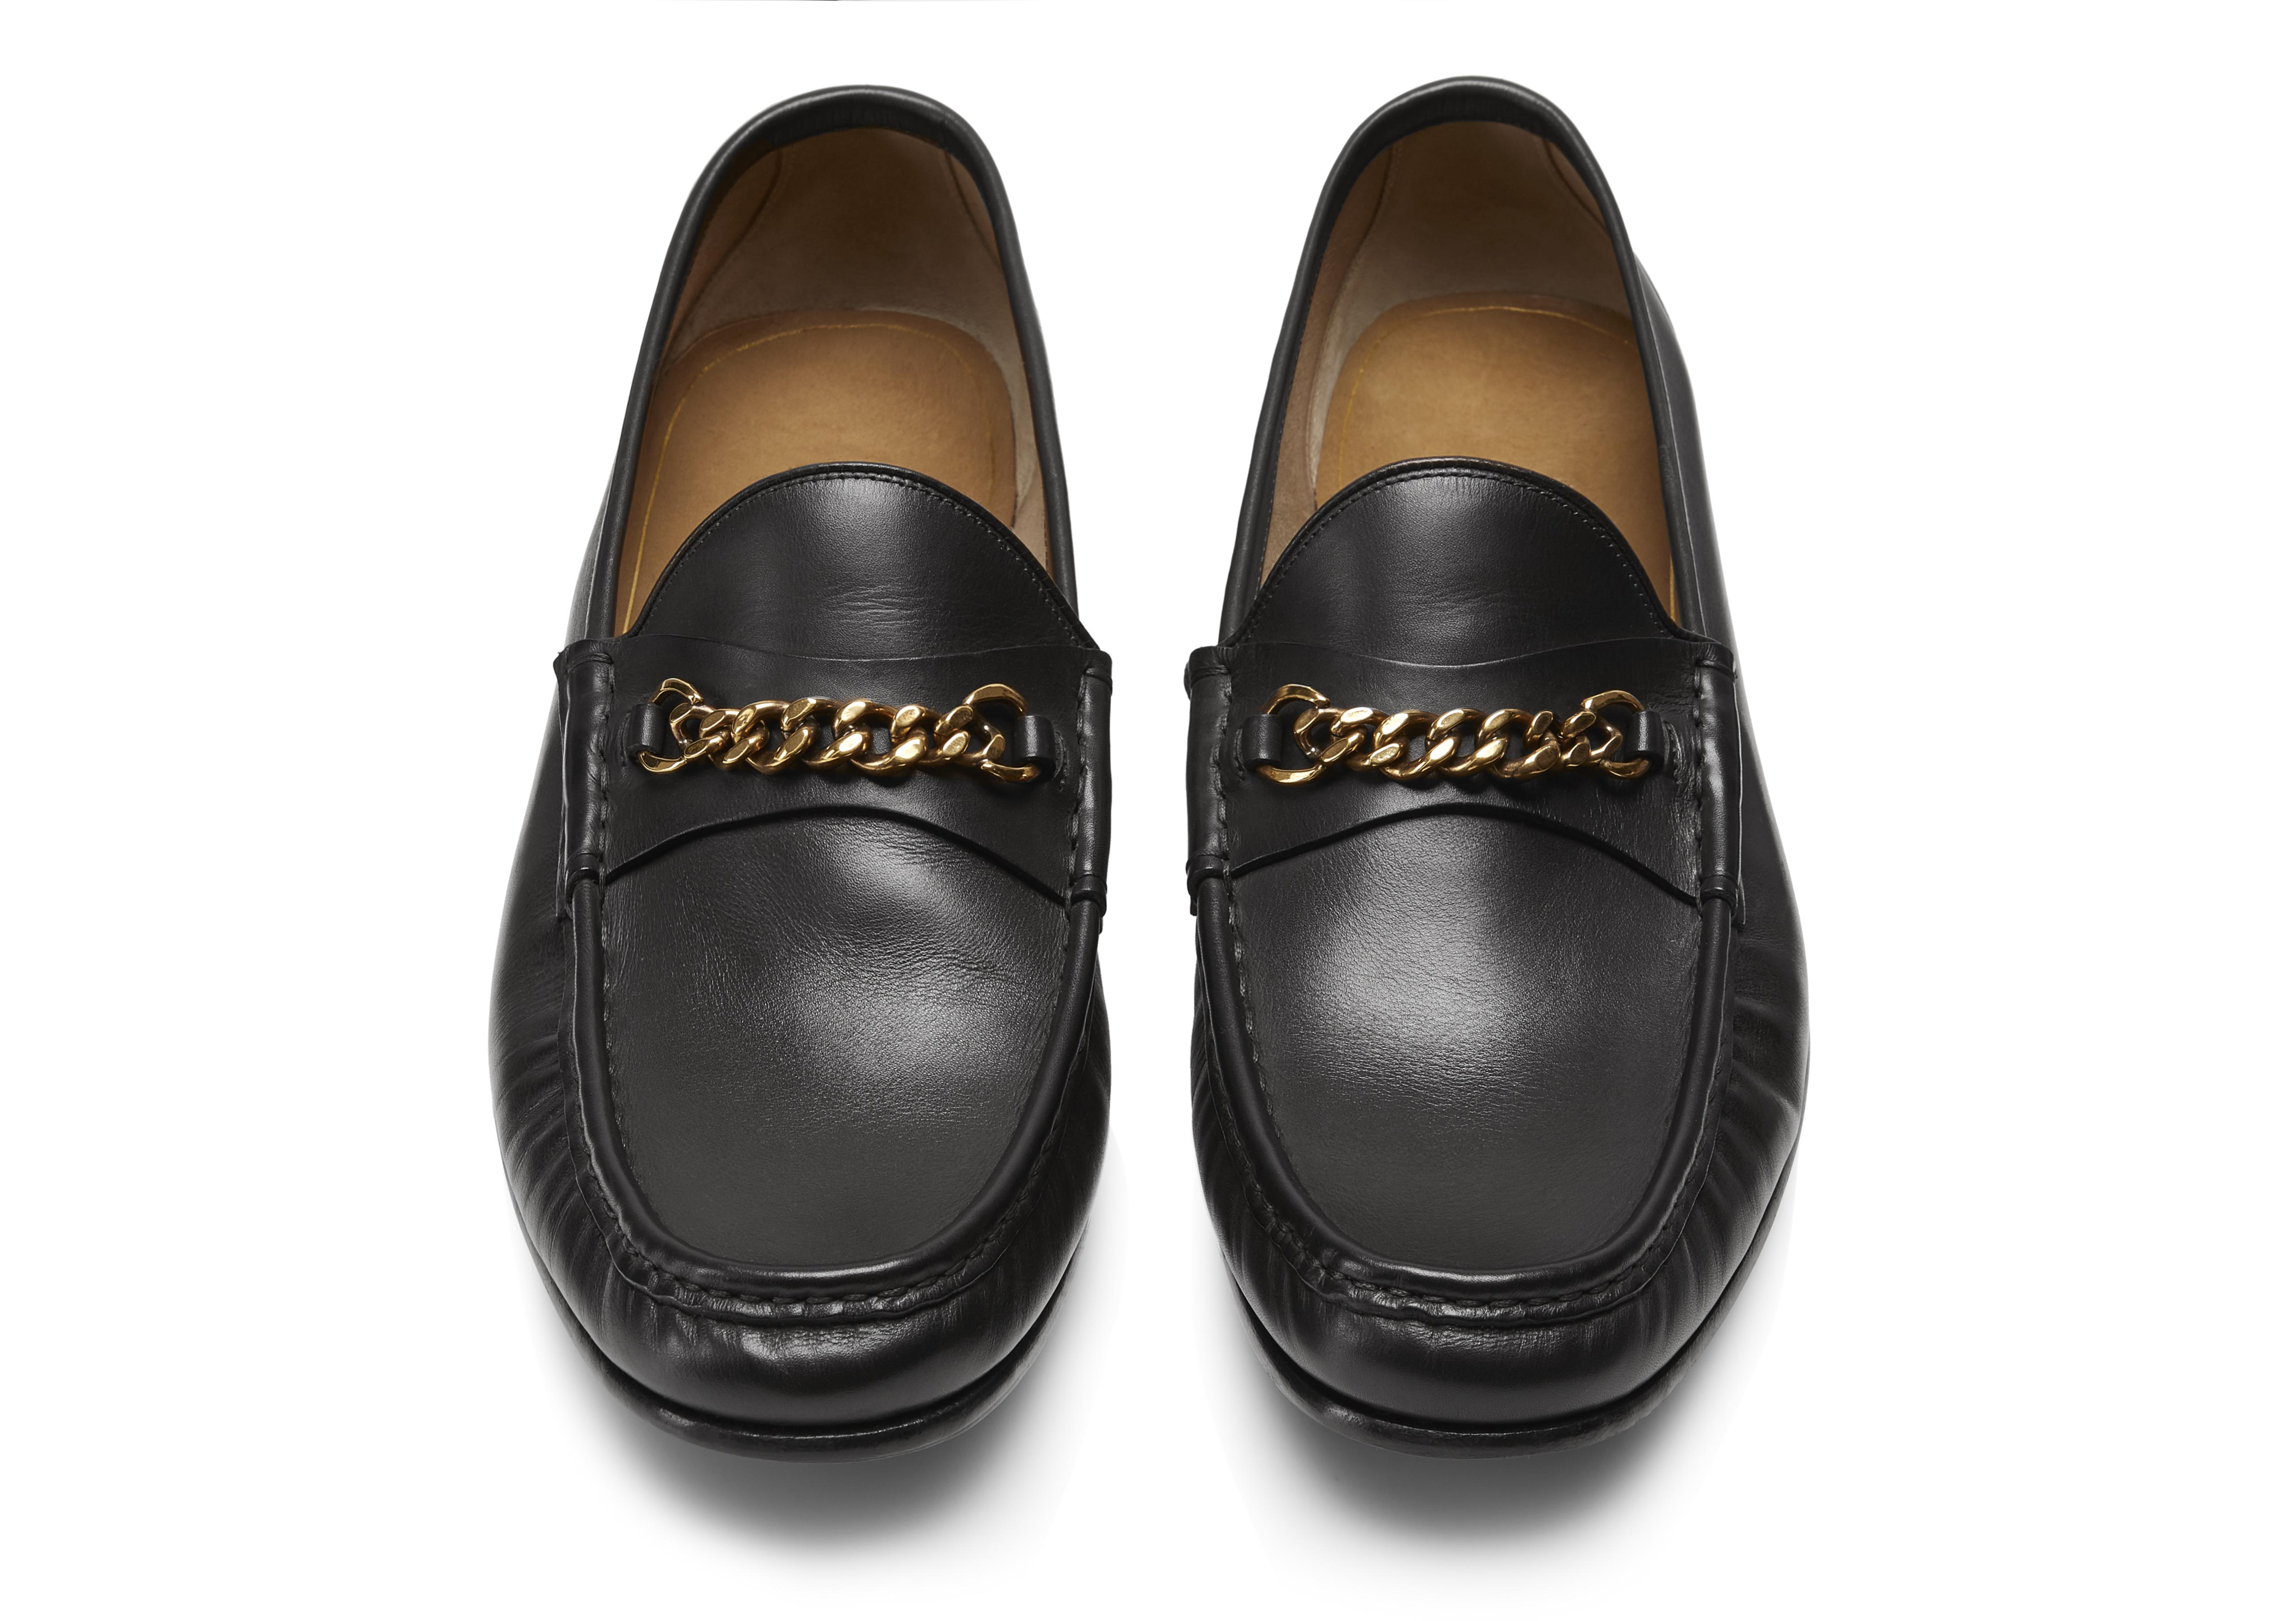 Men's Gold Chain Loafers